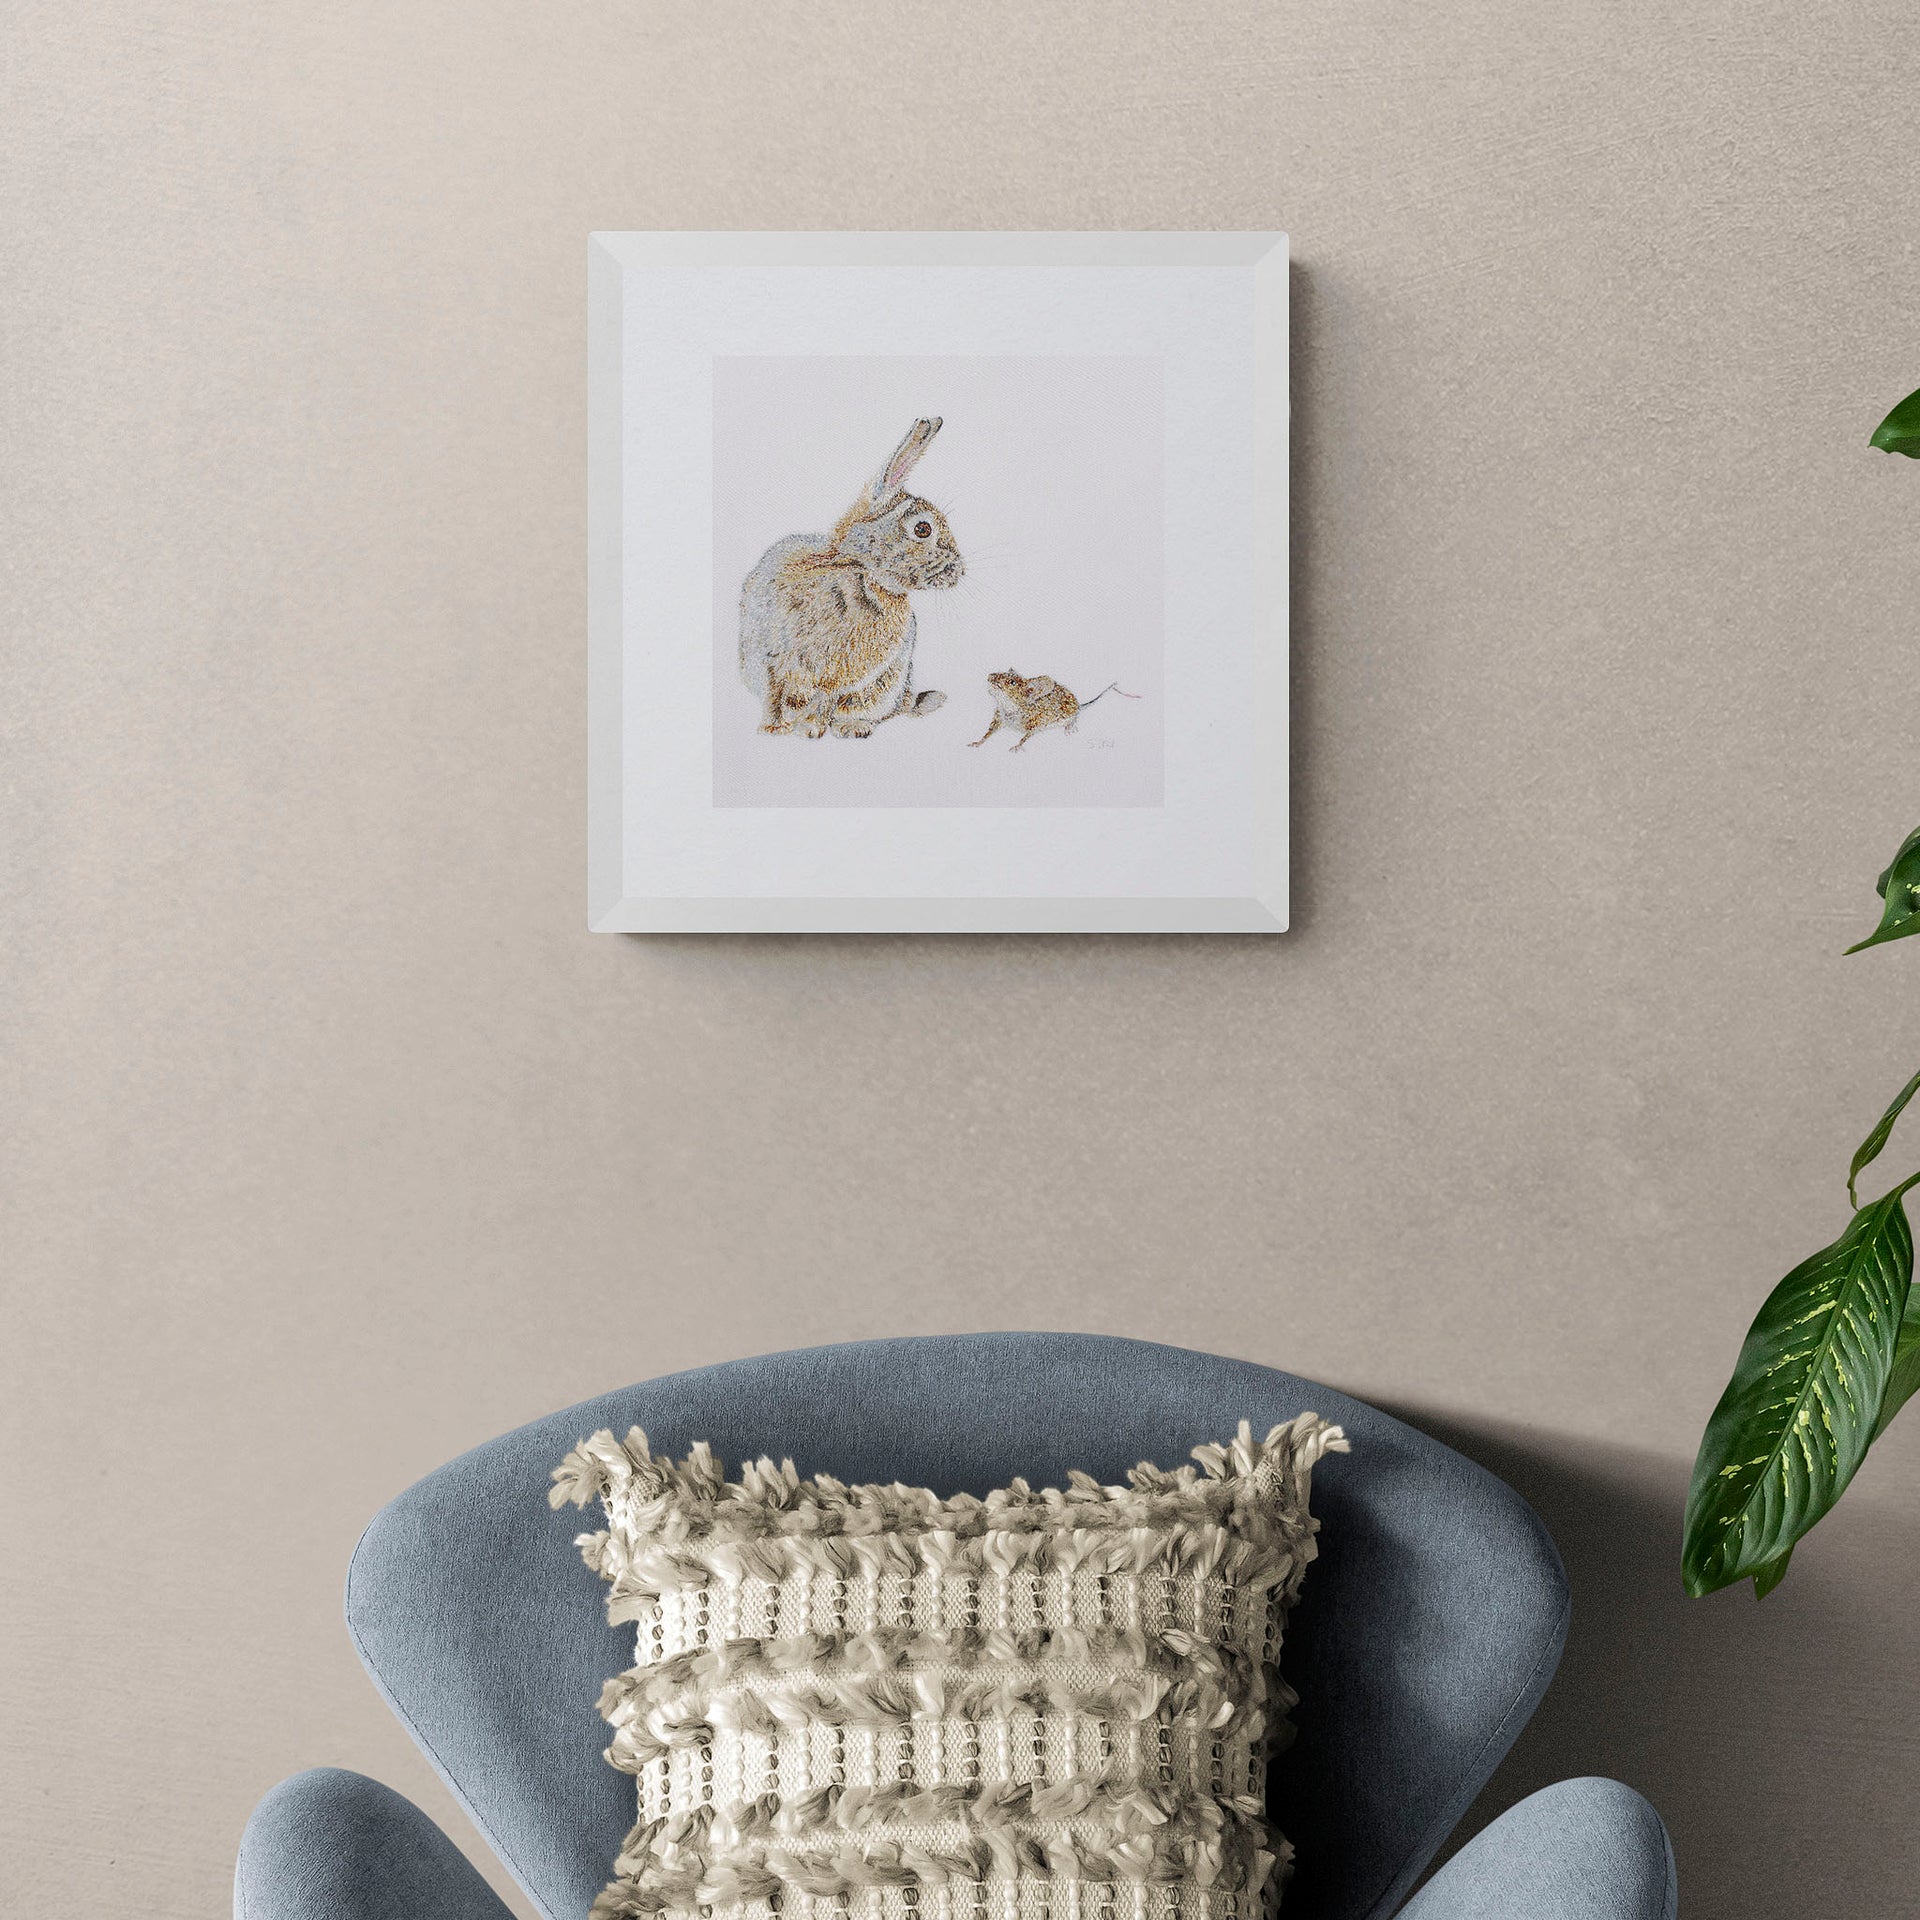 Hand embroidered rabbit and mouse artwork on the wall